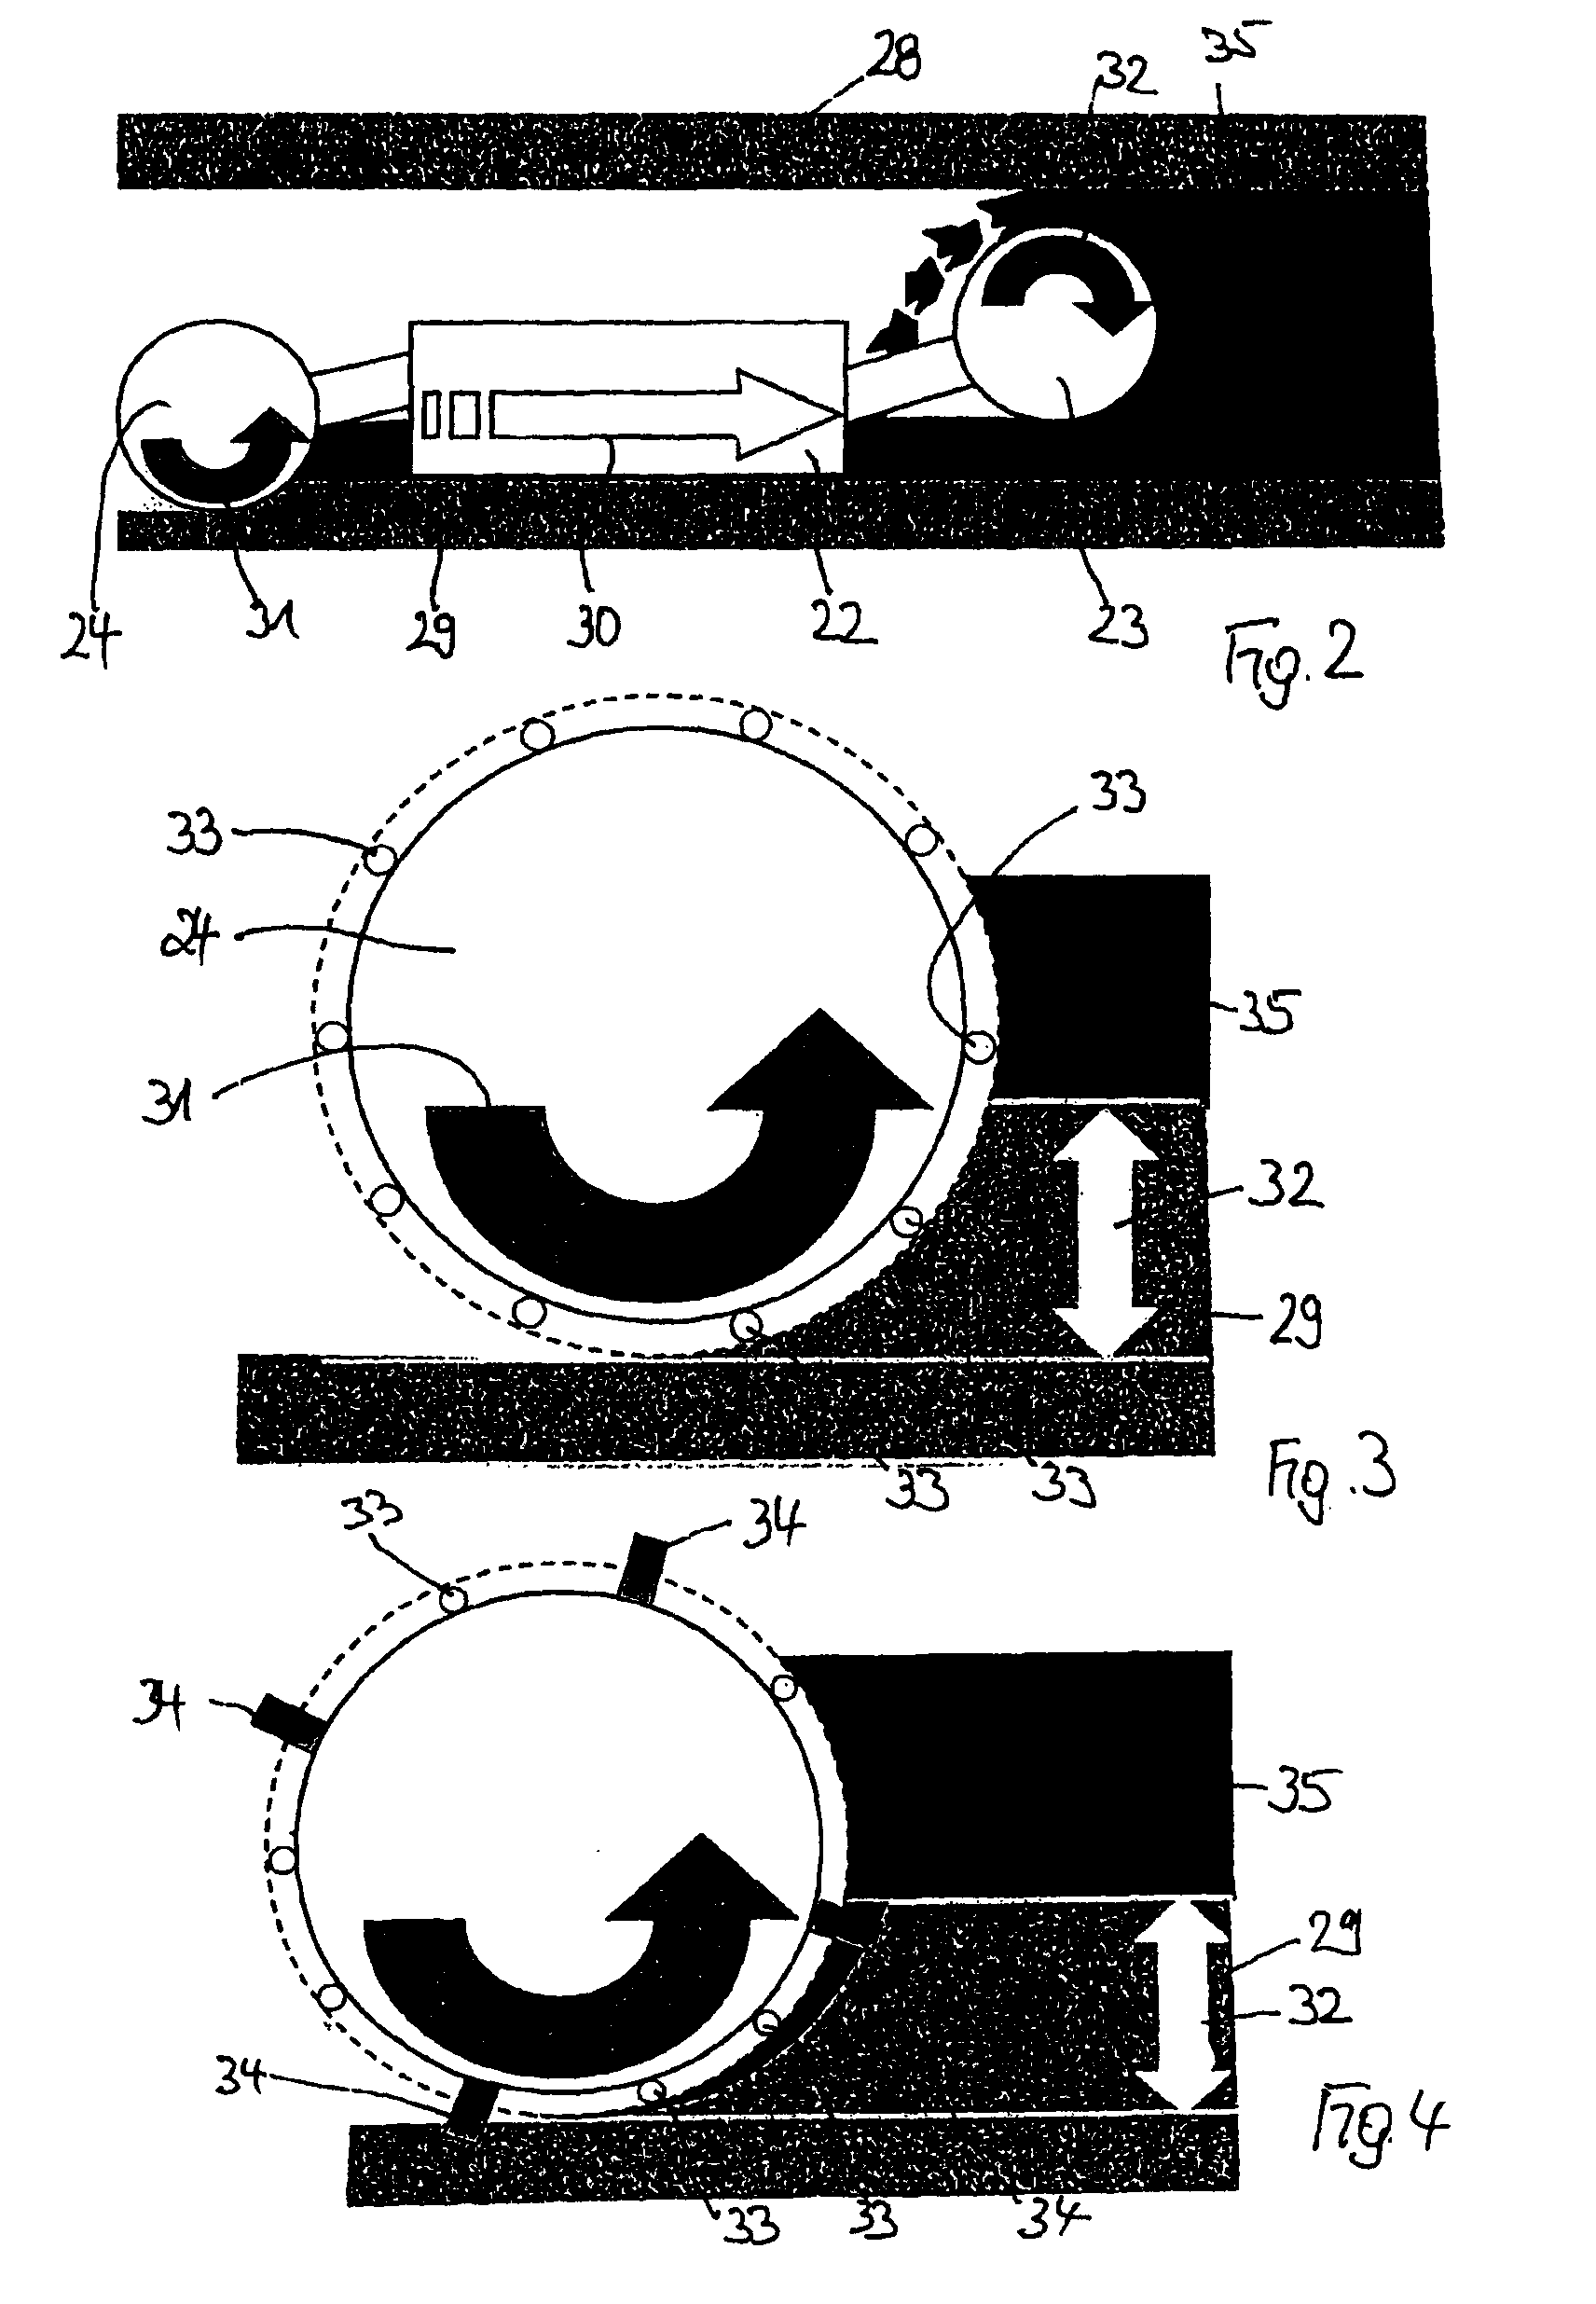 Method for controlling longwall operations using boundary layer recognition